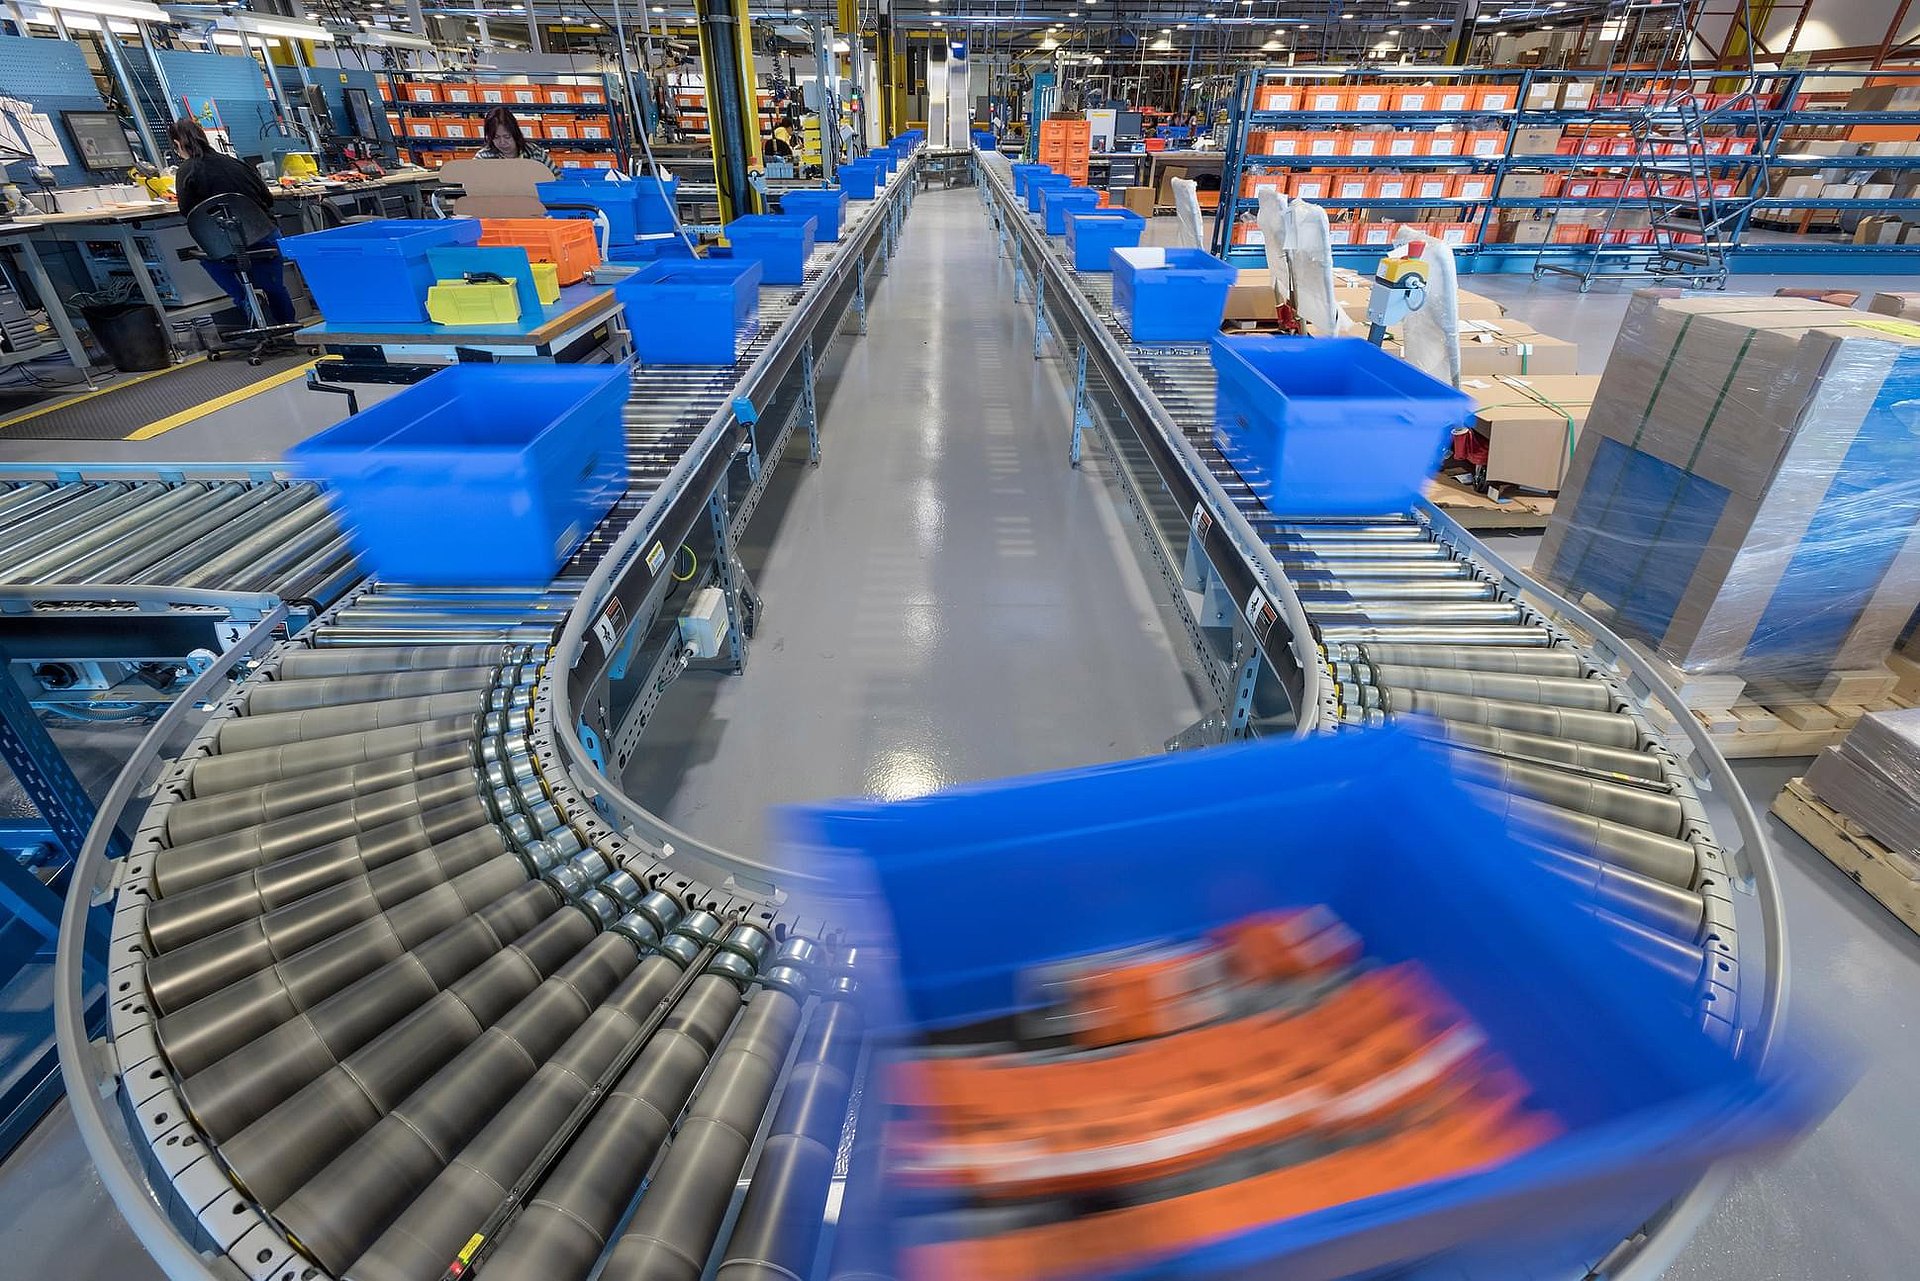 Conveyor system with blue containers in a logistics hall